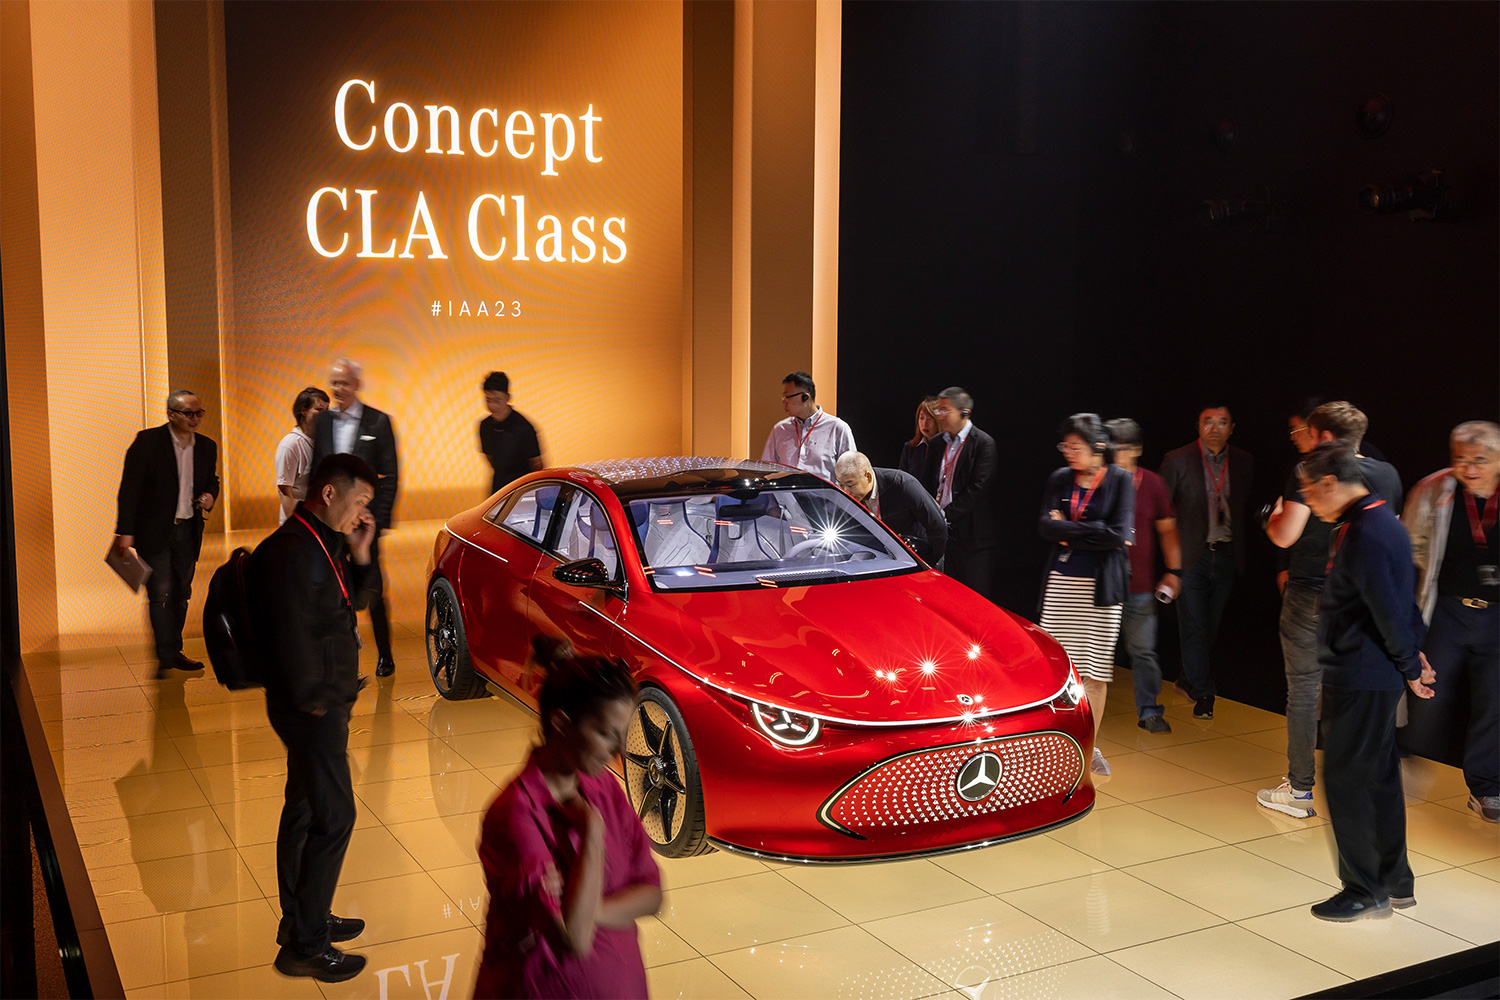 The Mercedes-Benz Concept CLA Class Sedan on display at the IAA Mobility Show 2023